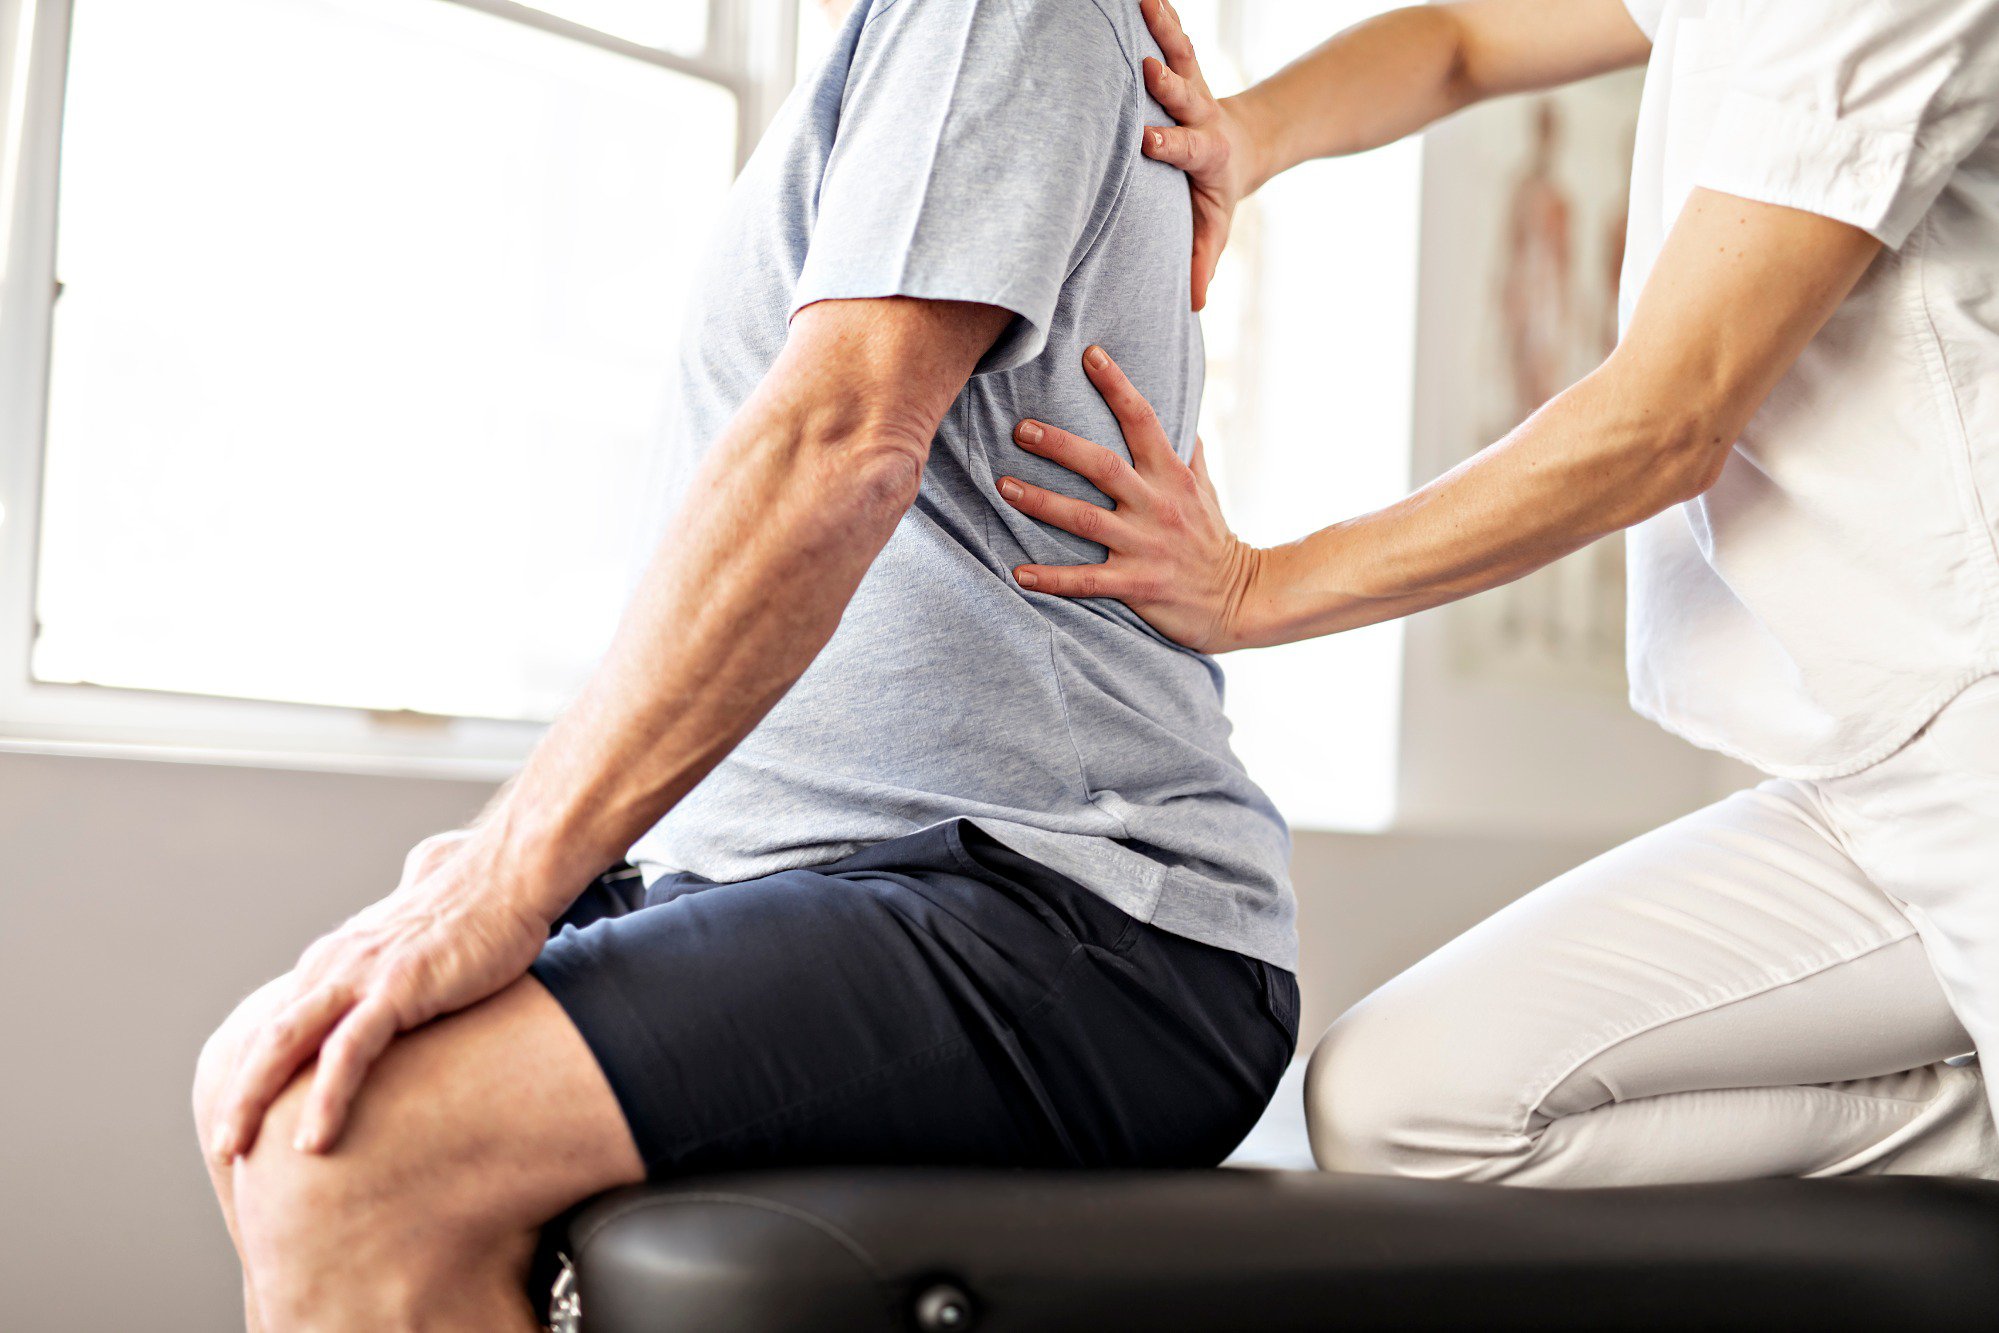 Why is Physical Therapy So Important to Your Recovery